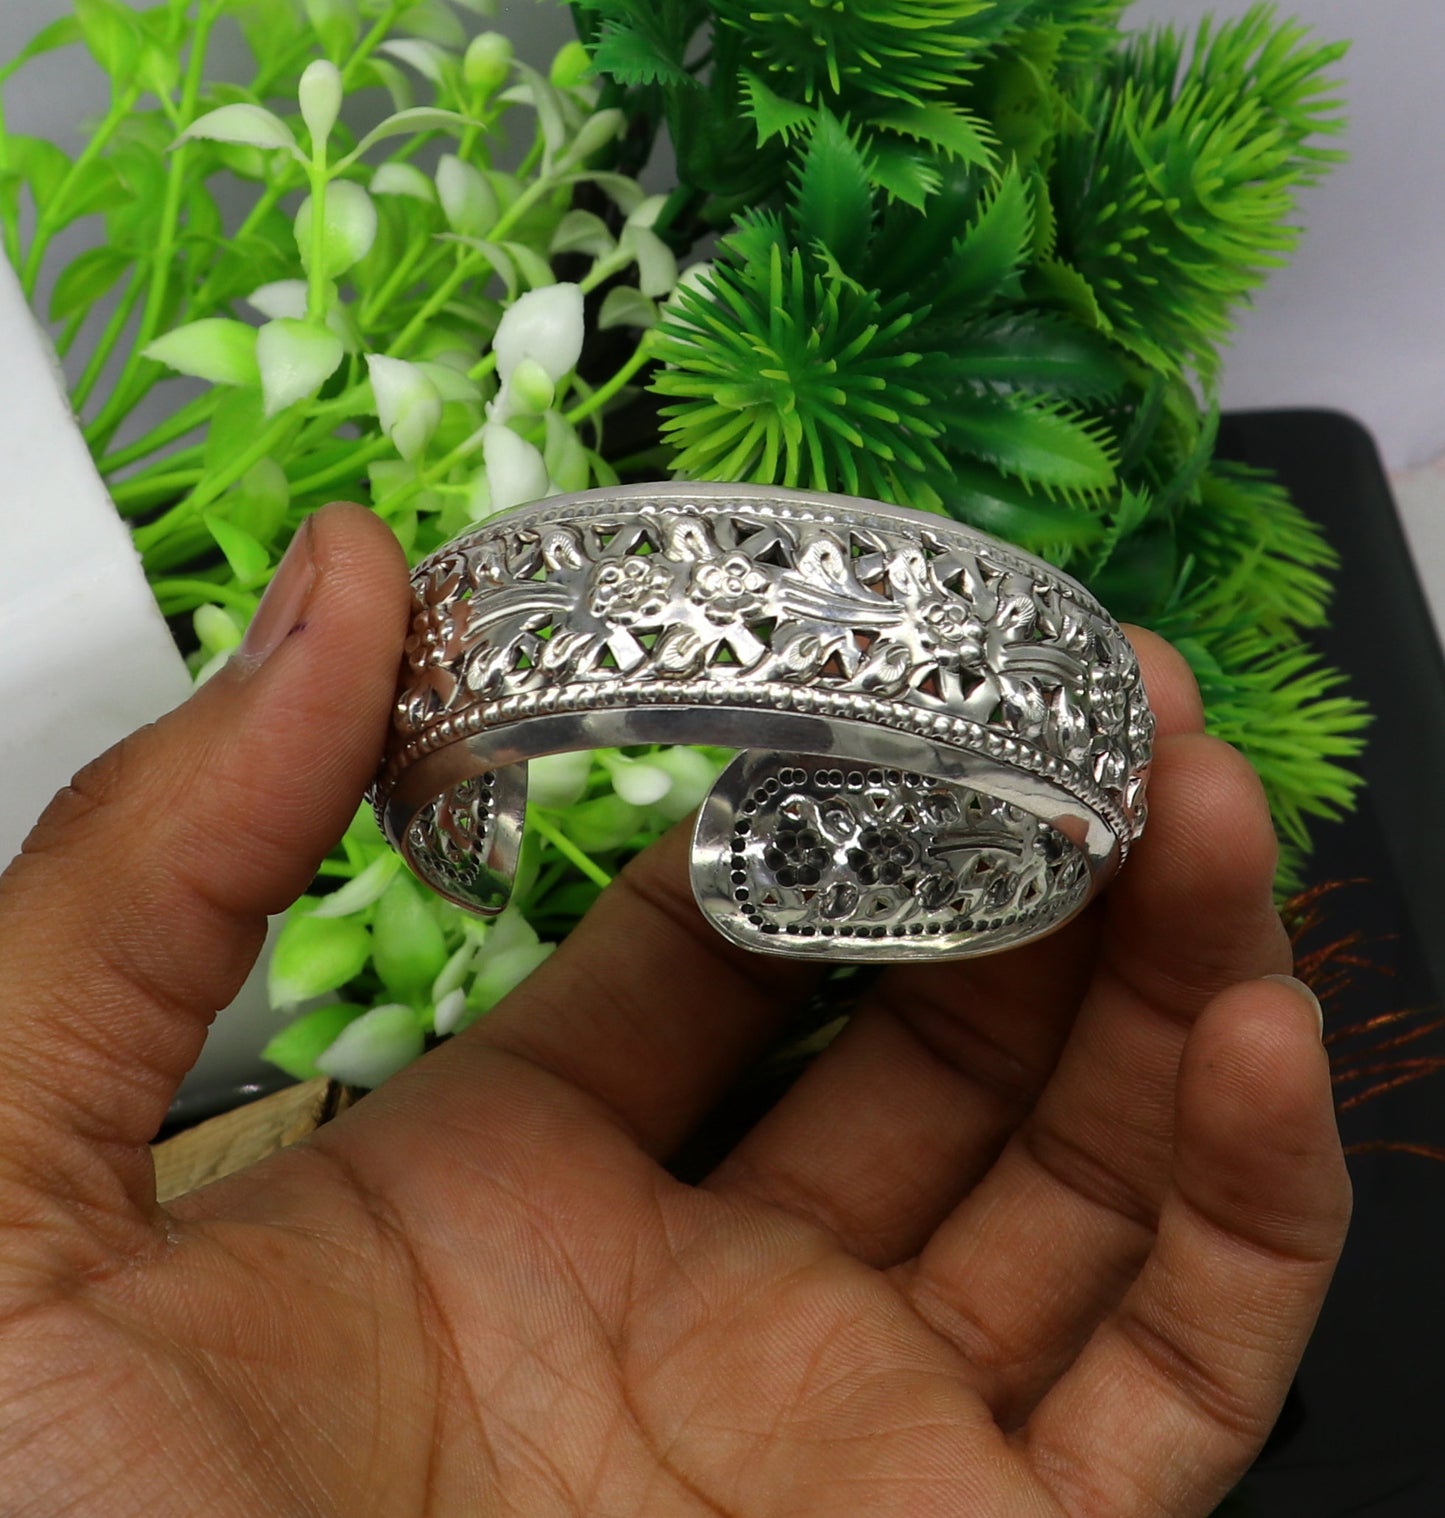 925 sterling silver customized flower design adjustable gifting bangle cuff bracelet vintage tribal ethnic personalized jewelry cuff15 - TRIBAL ORNAMENTS